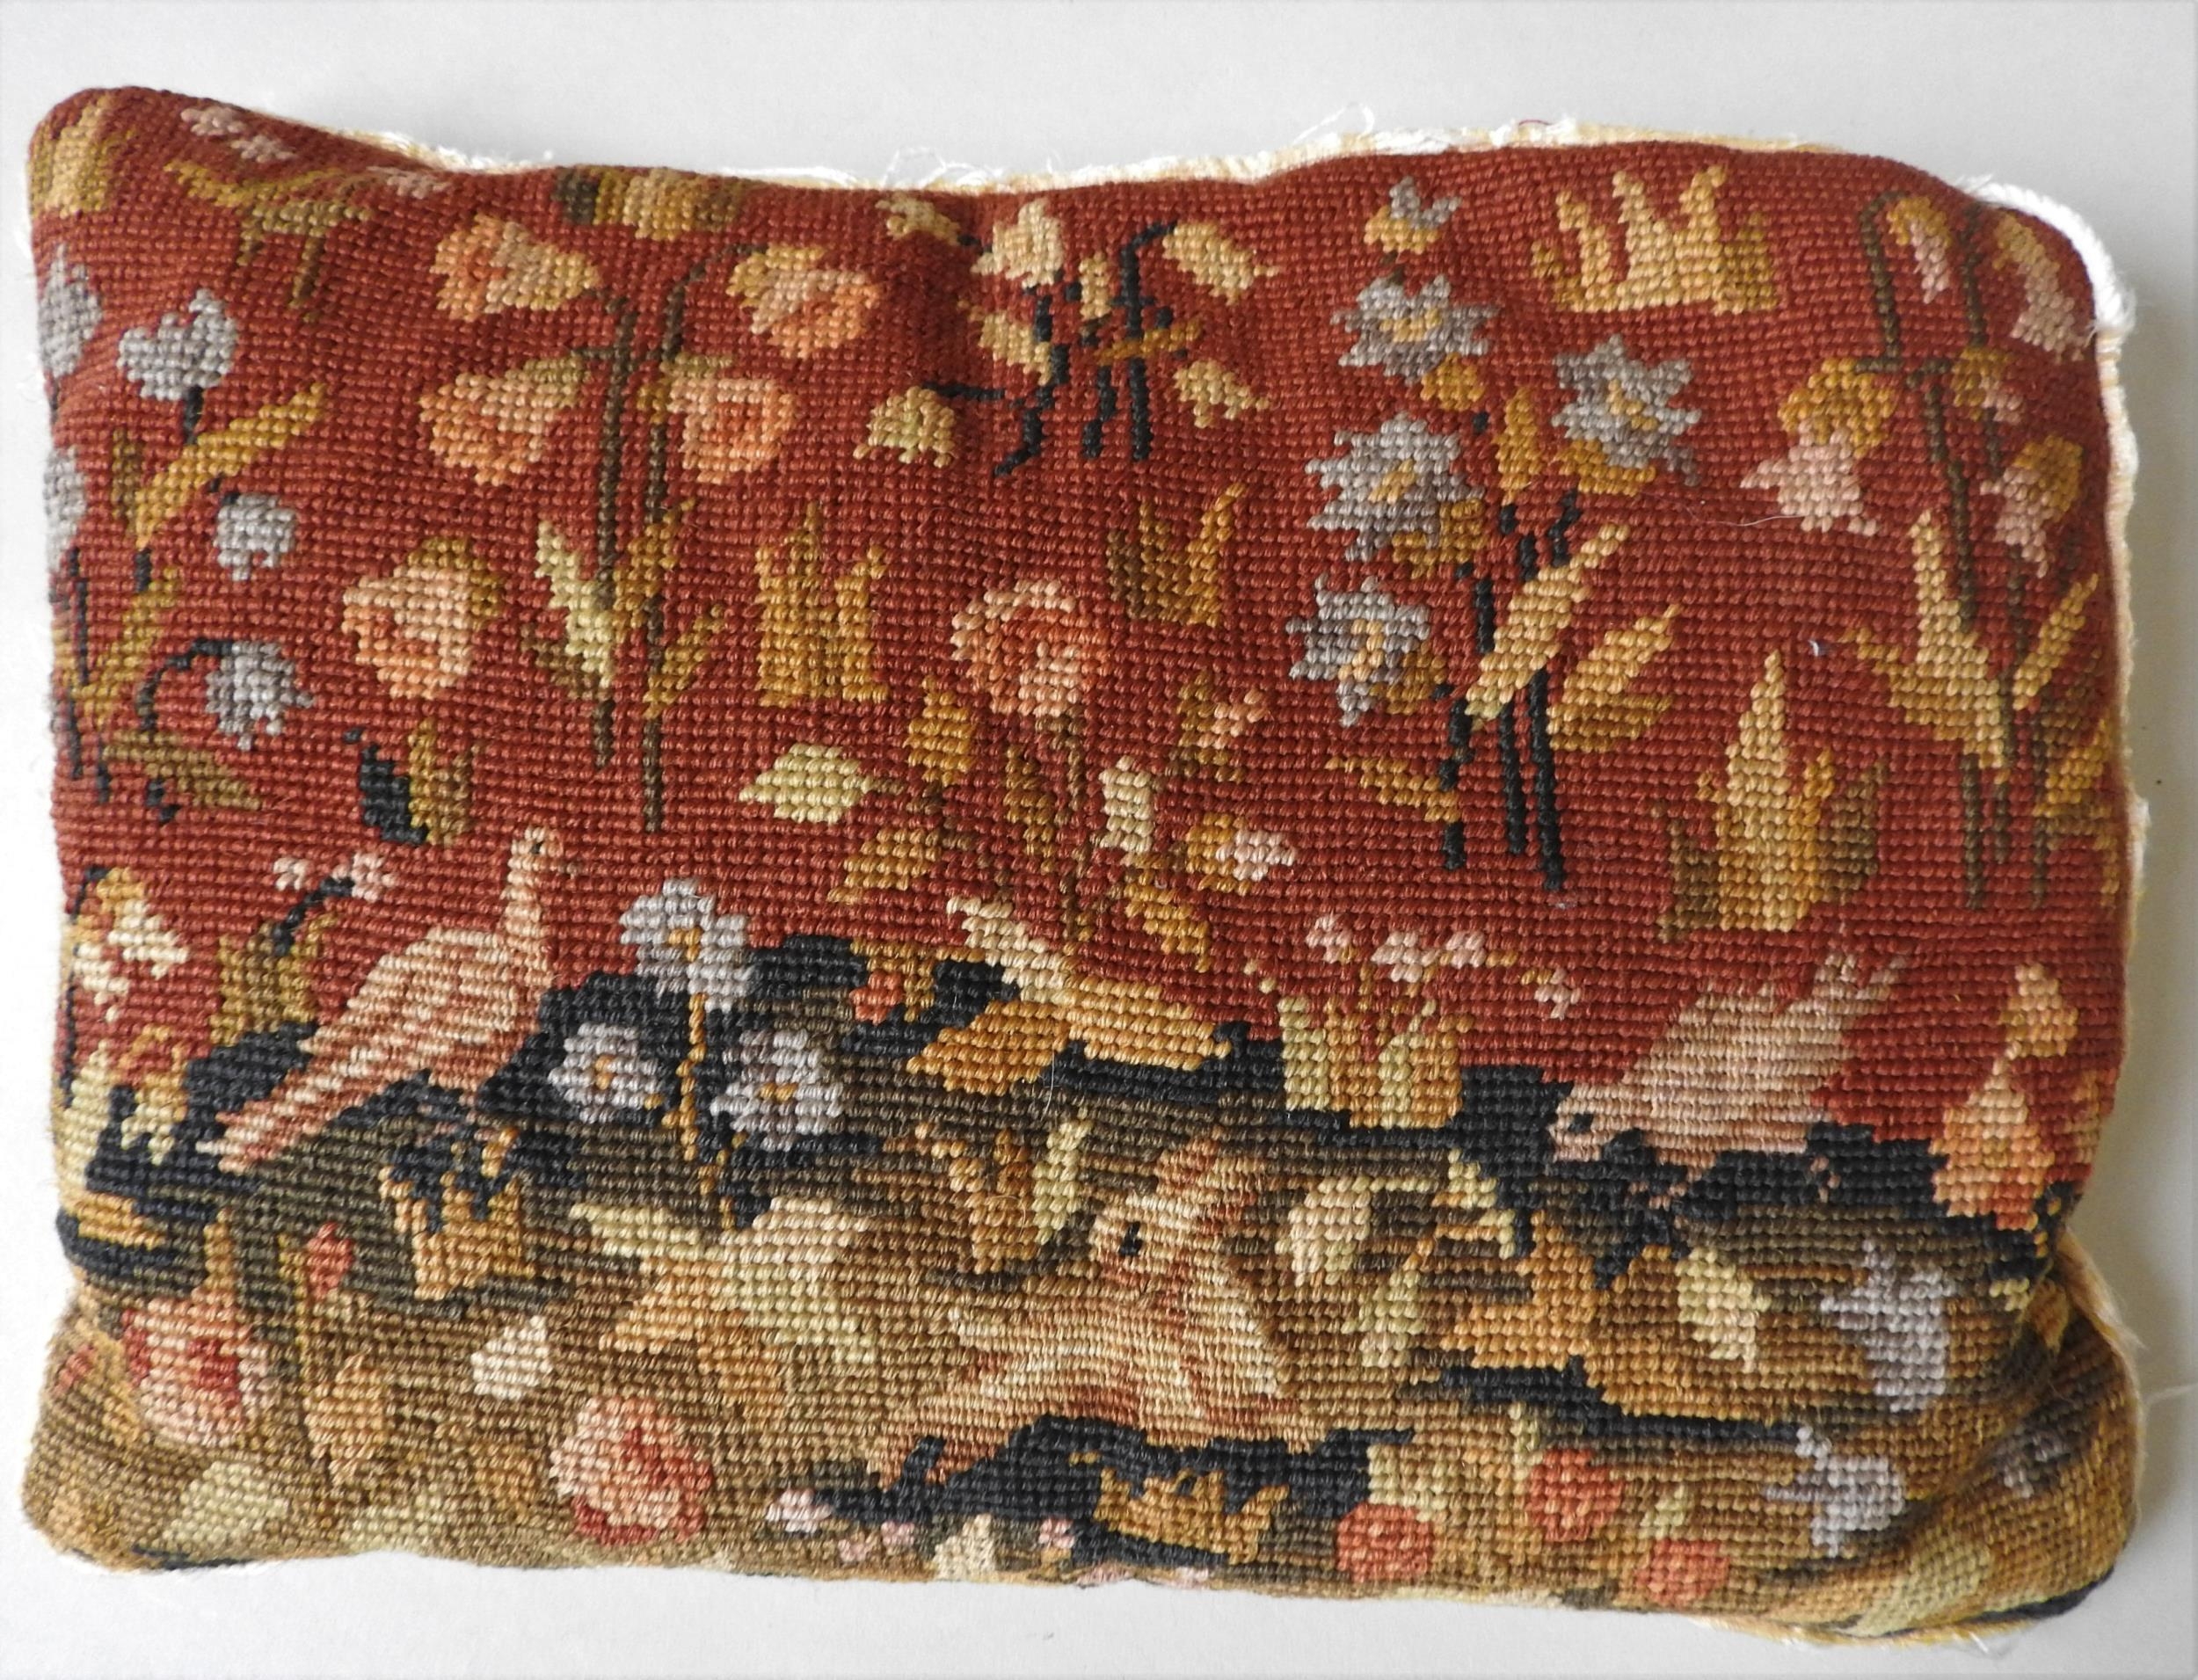 A LATE 18TH / EARLY 19TH CENTURY TAPETRY PANEL CUSHION, depicting rabbit and birds within a floral